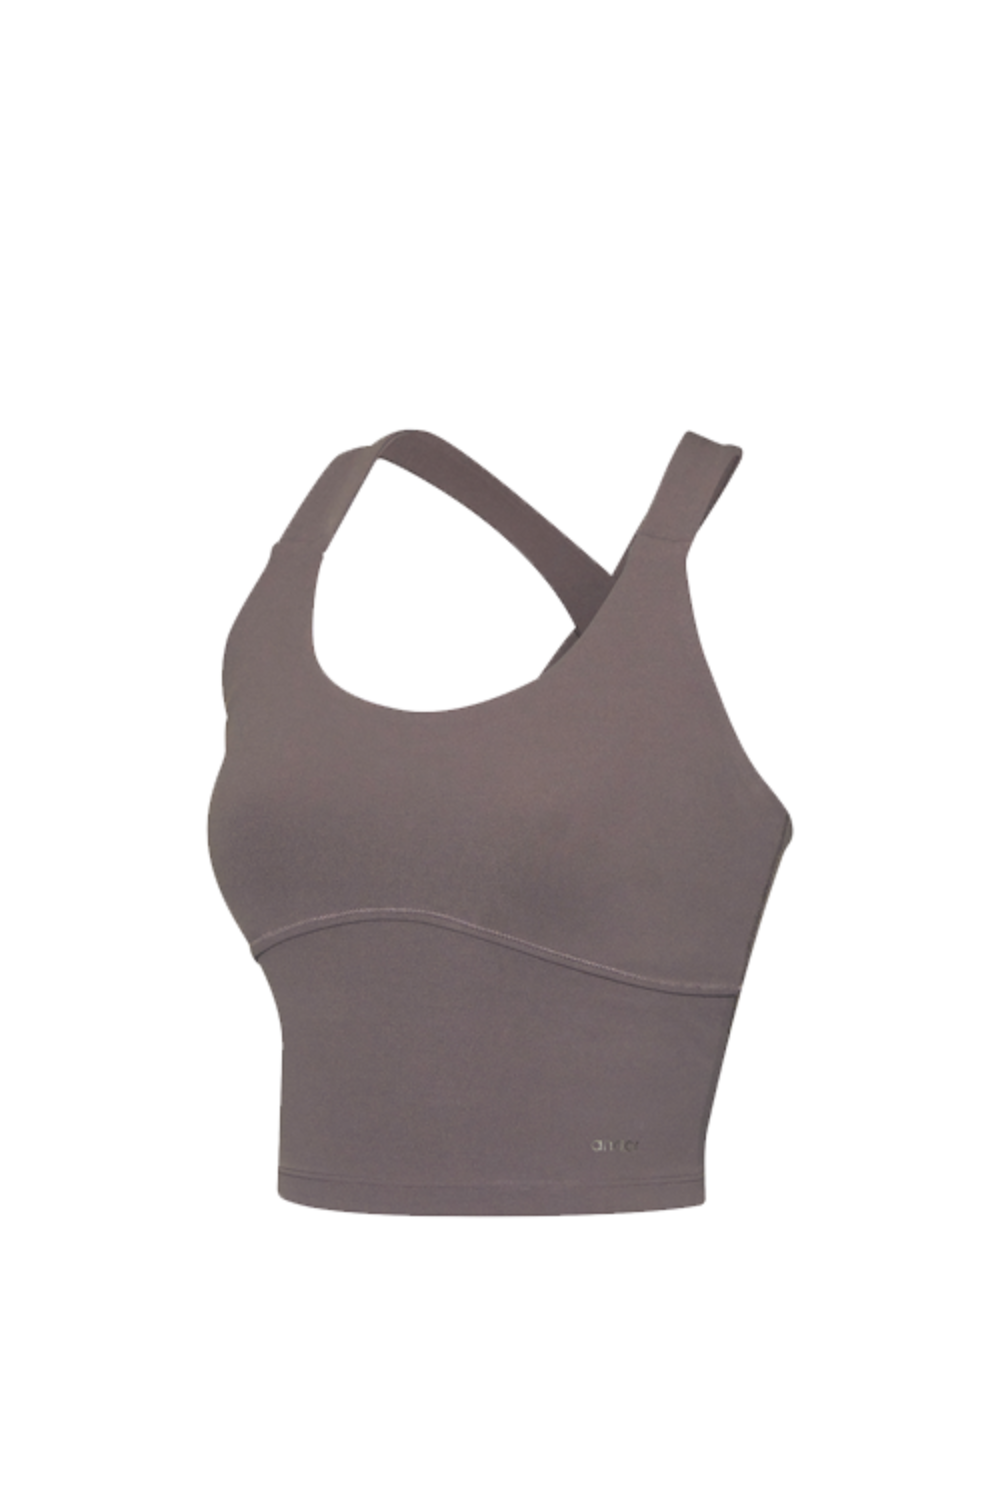 Aircooling Crop Top , A/B cups